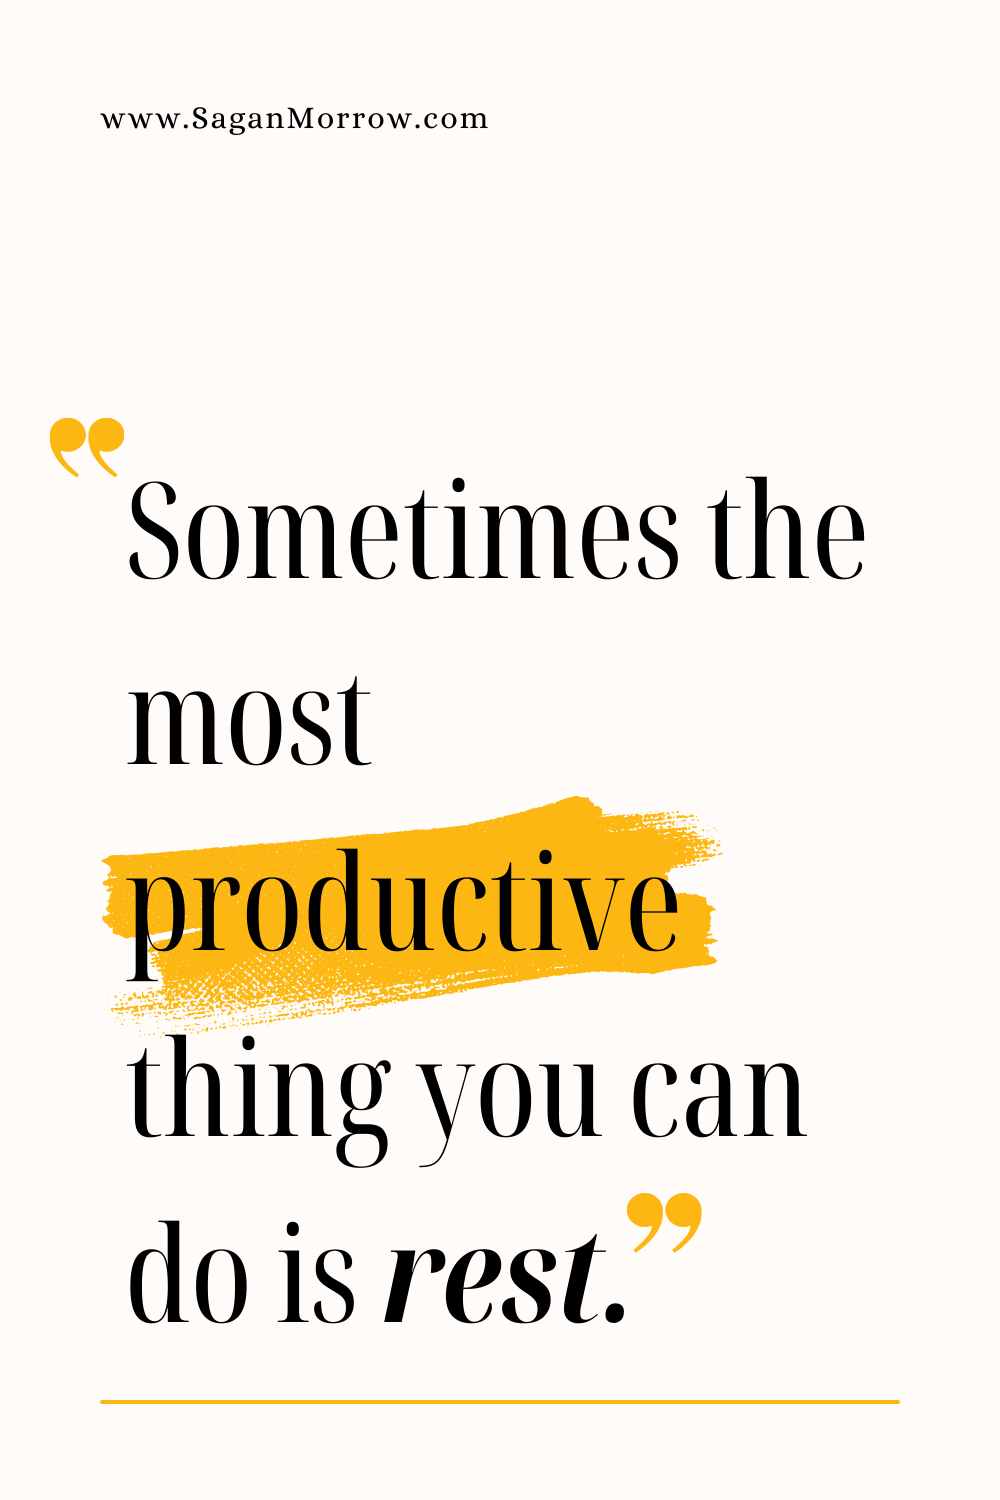 "Sometimes the most productive thing you can do is rest." Time management vs energy management quotes and productivity tips for freelancers